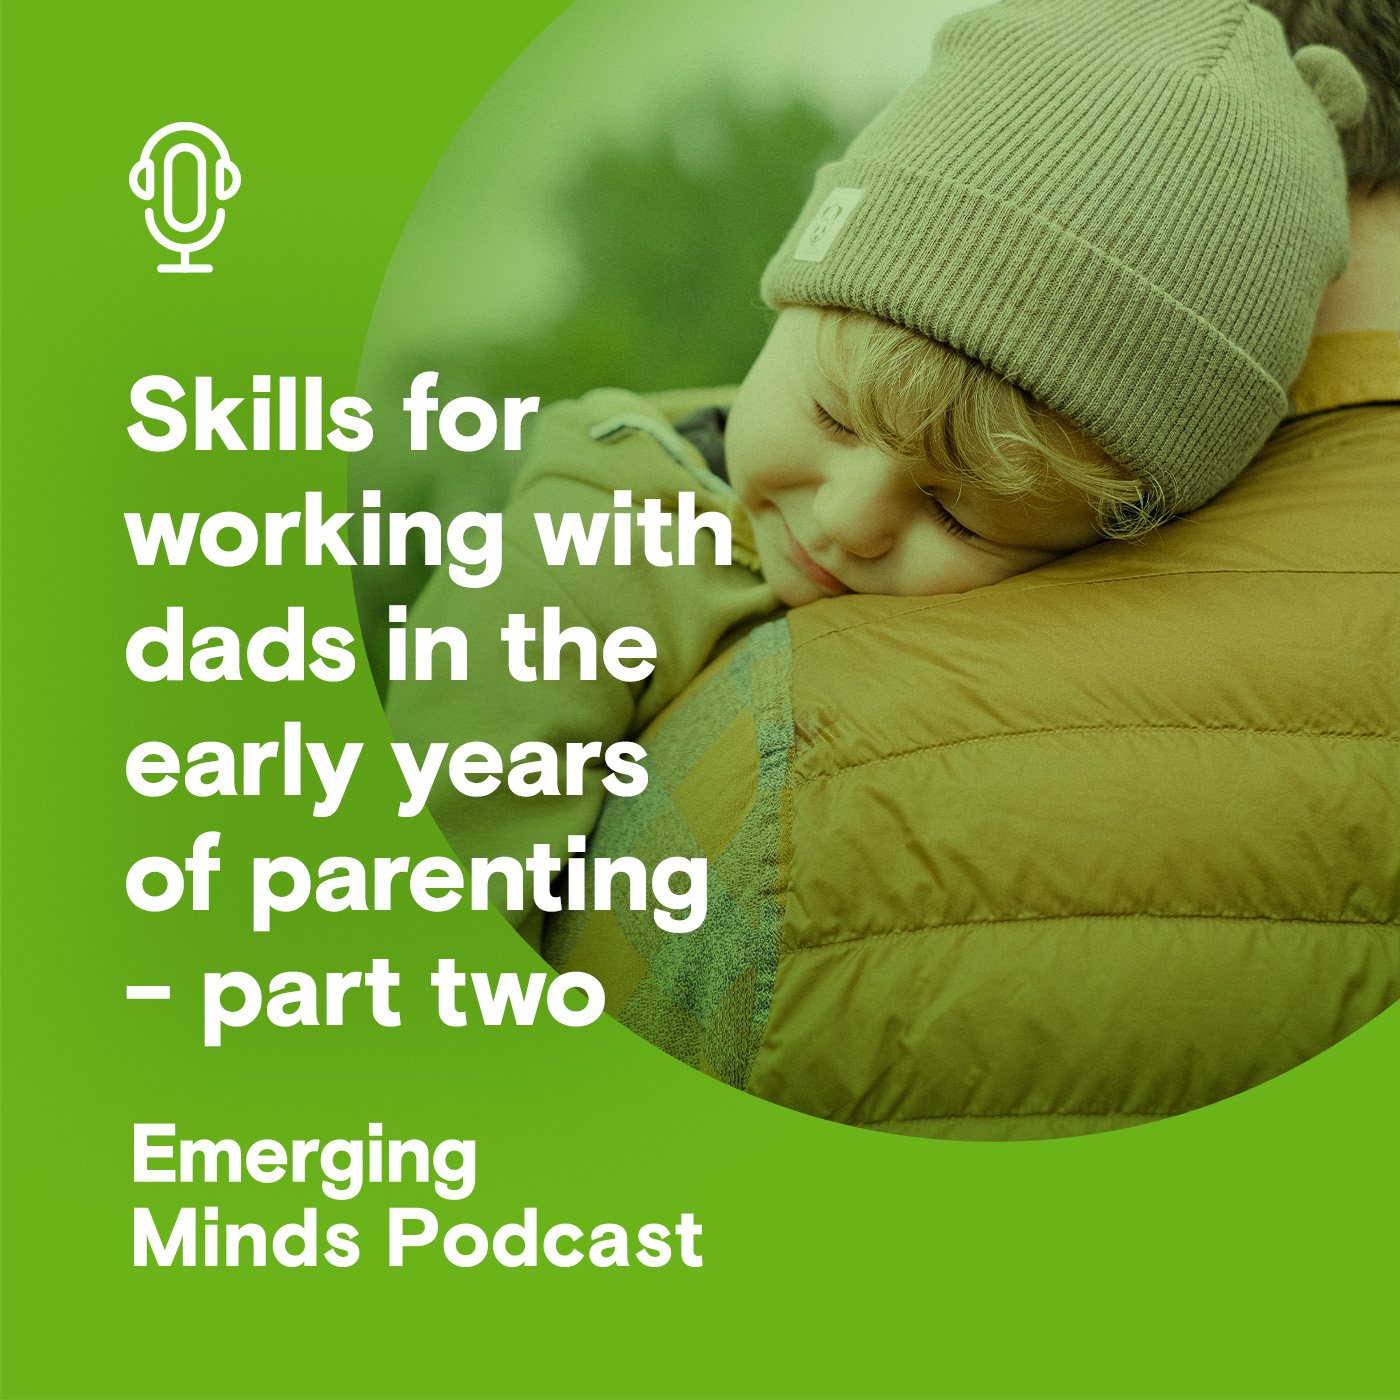 Skills for working with dads in the early years of parenting - part two